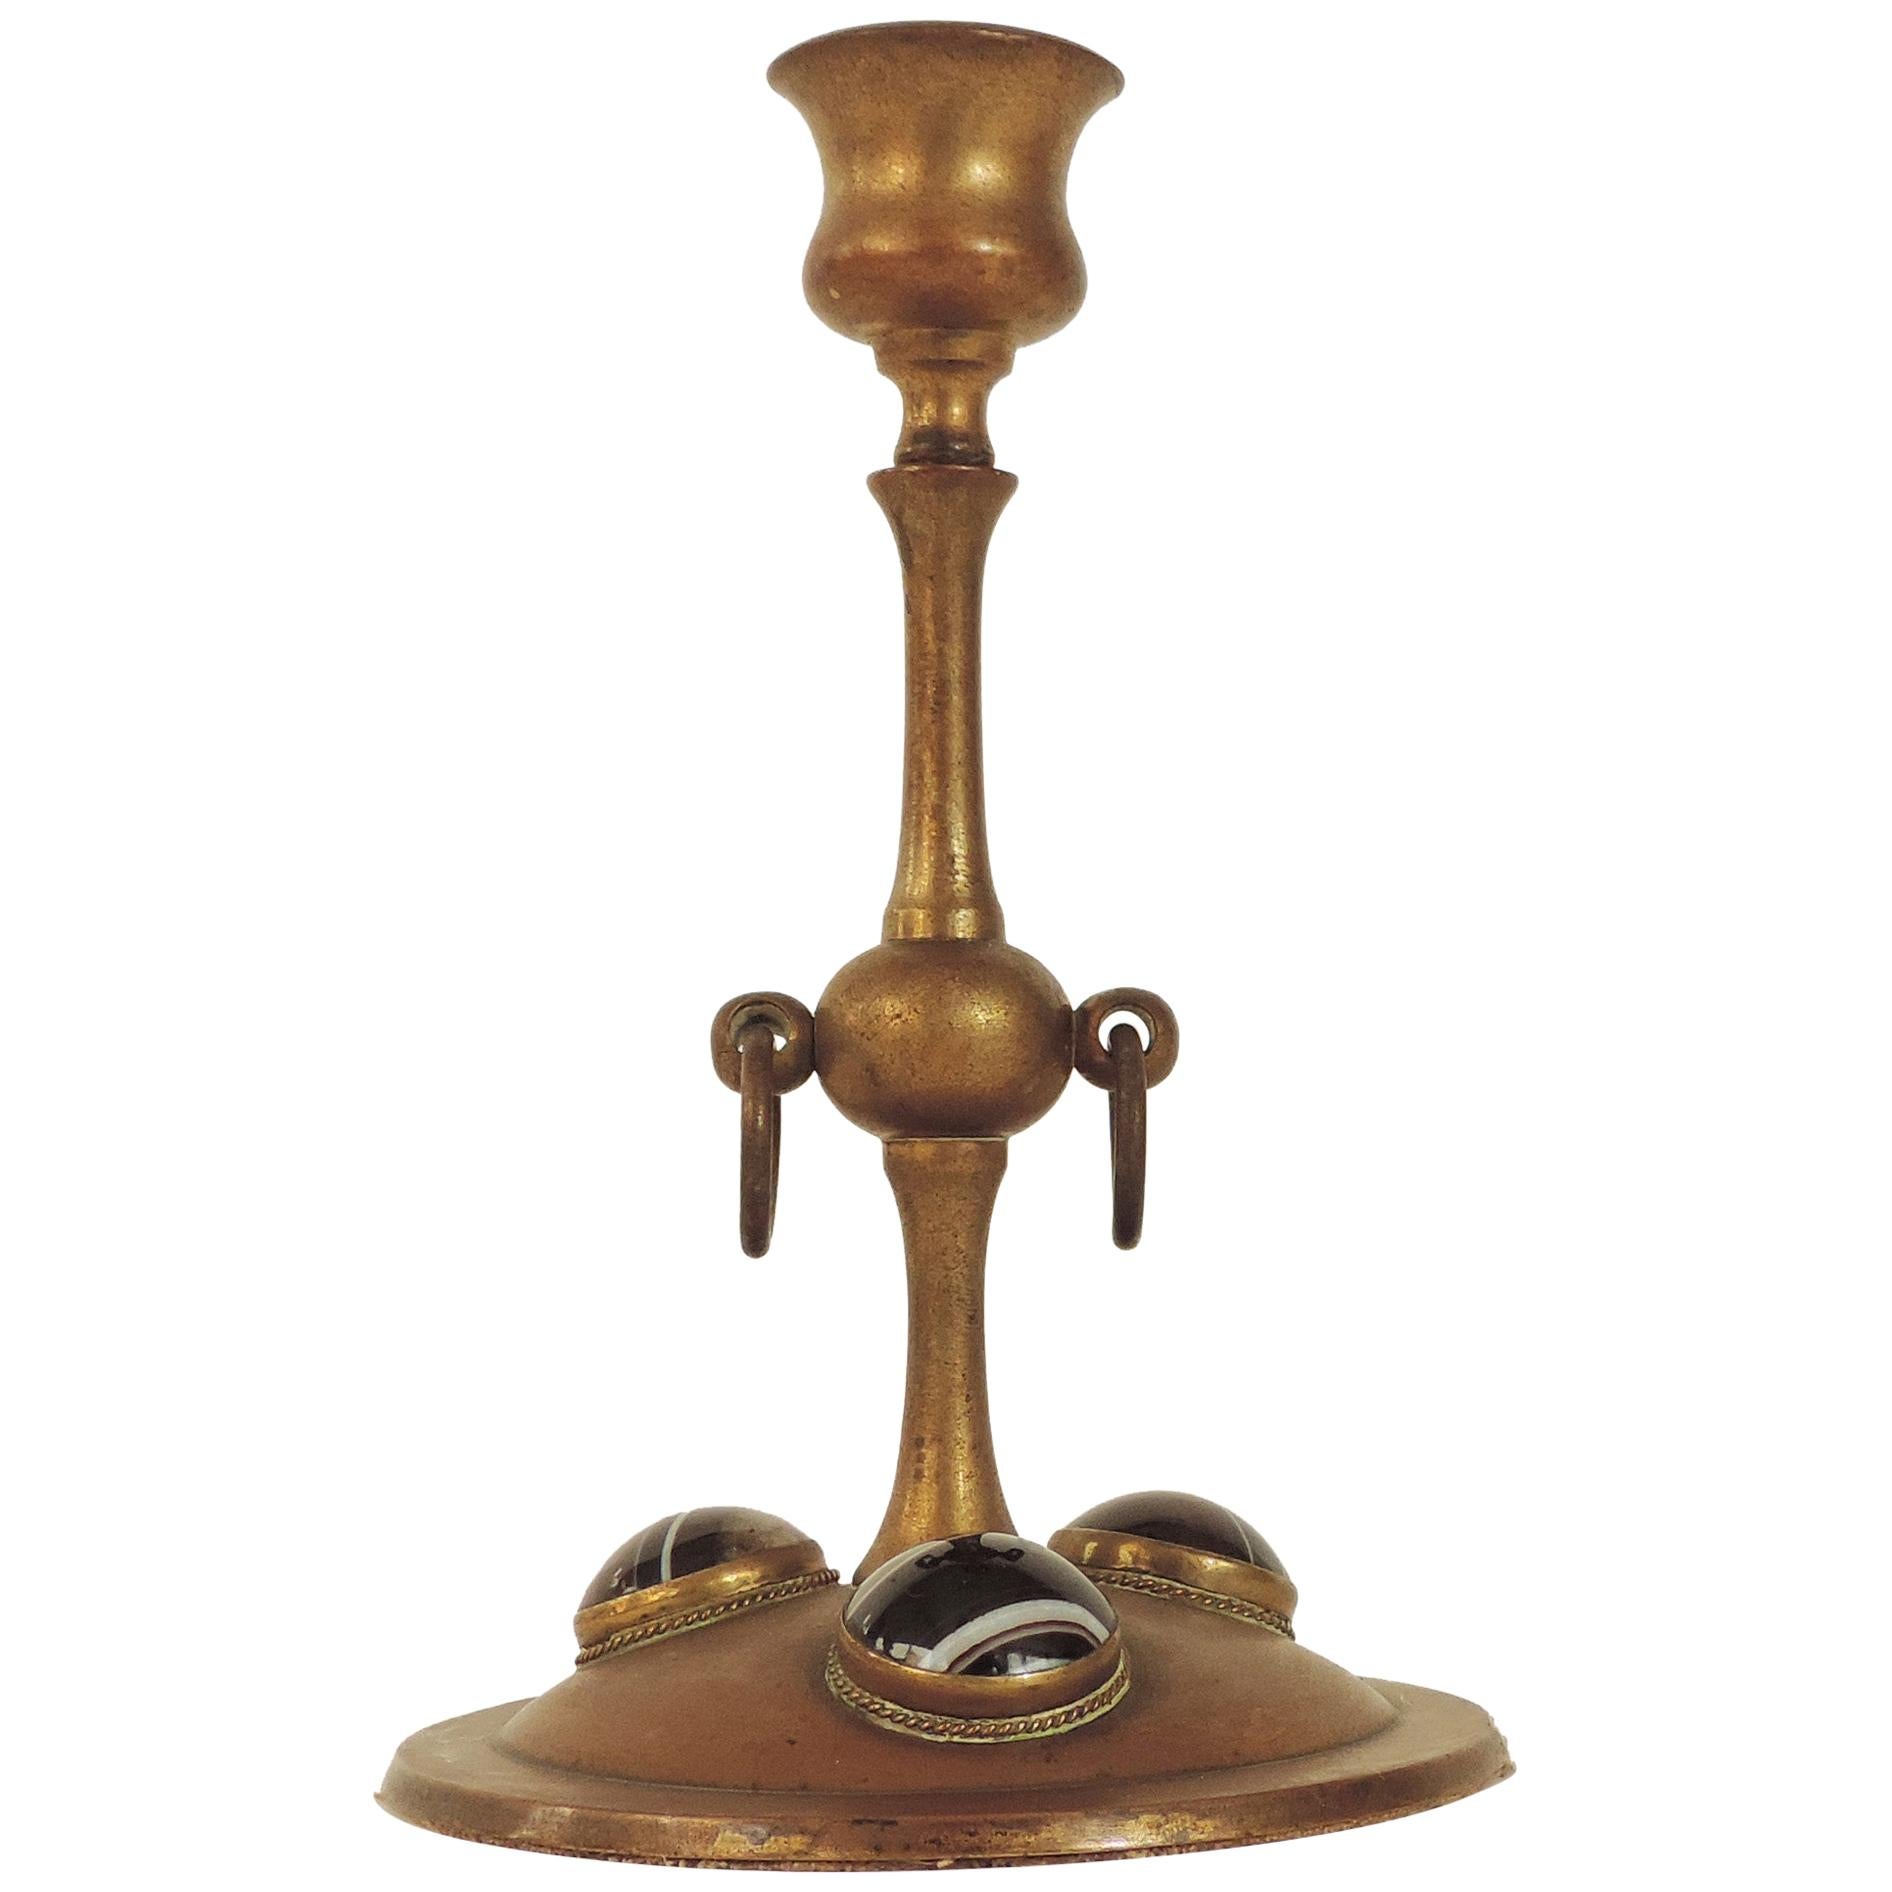 Moorish Candlestick in Brass and Hardstones Attributed to Tiffany, USA, 1920s